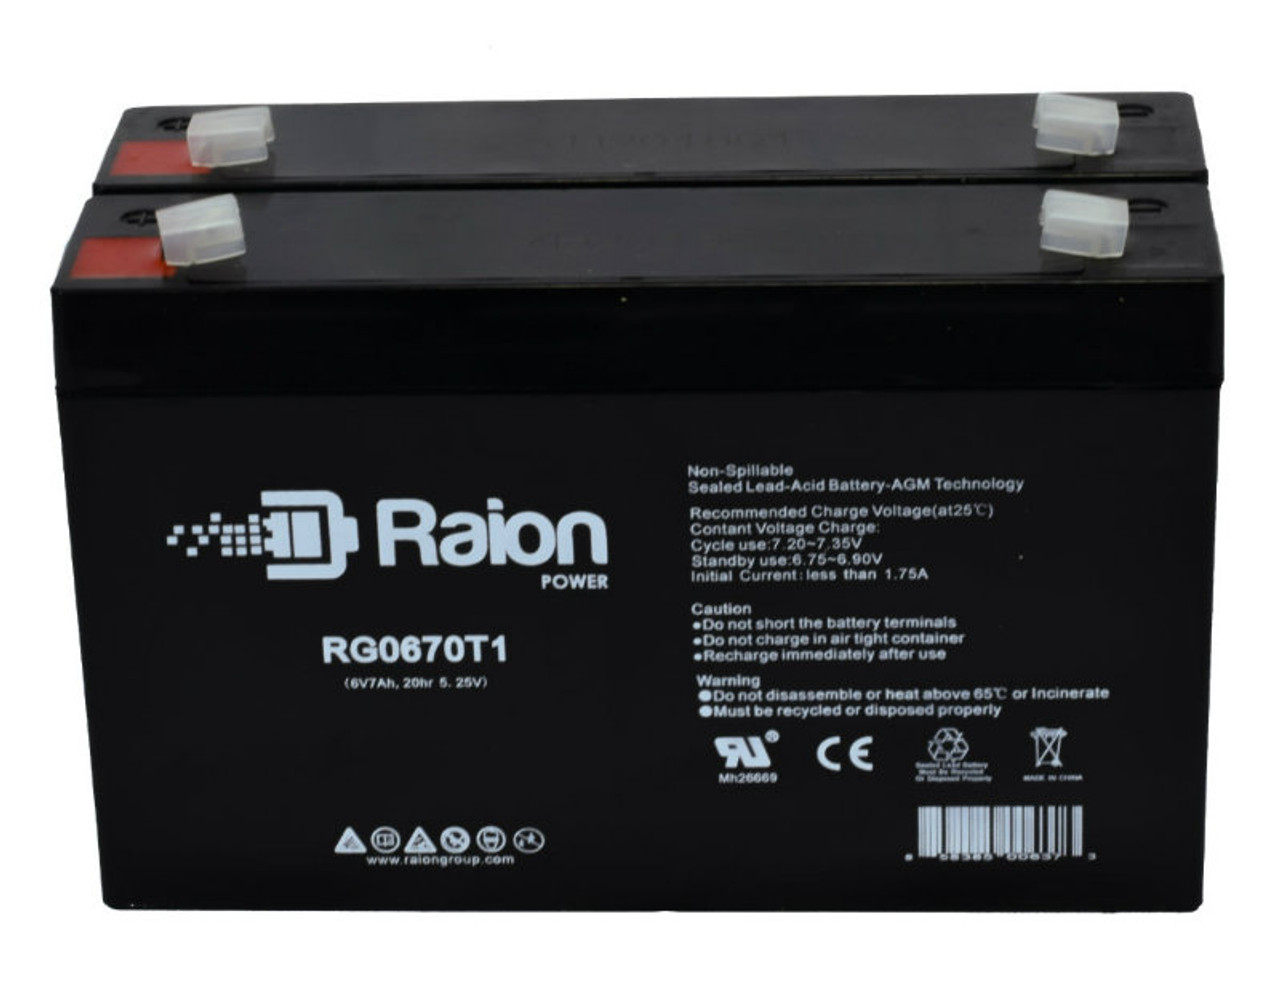 Raion Power RG0670T1 6V 7Ah Replacement Emergency Light Battery for Lithonia LLBE-1 - 2 Pack